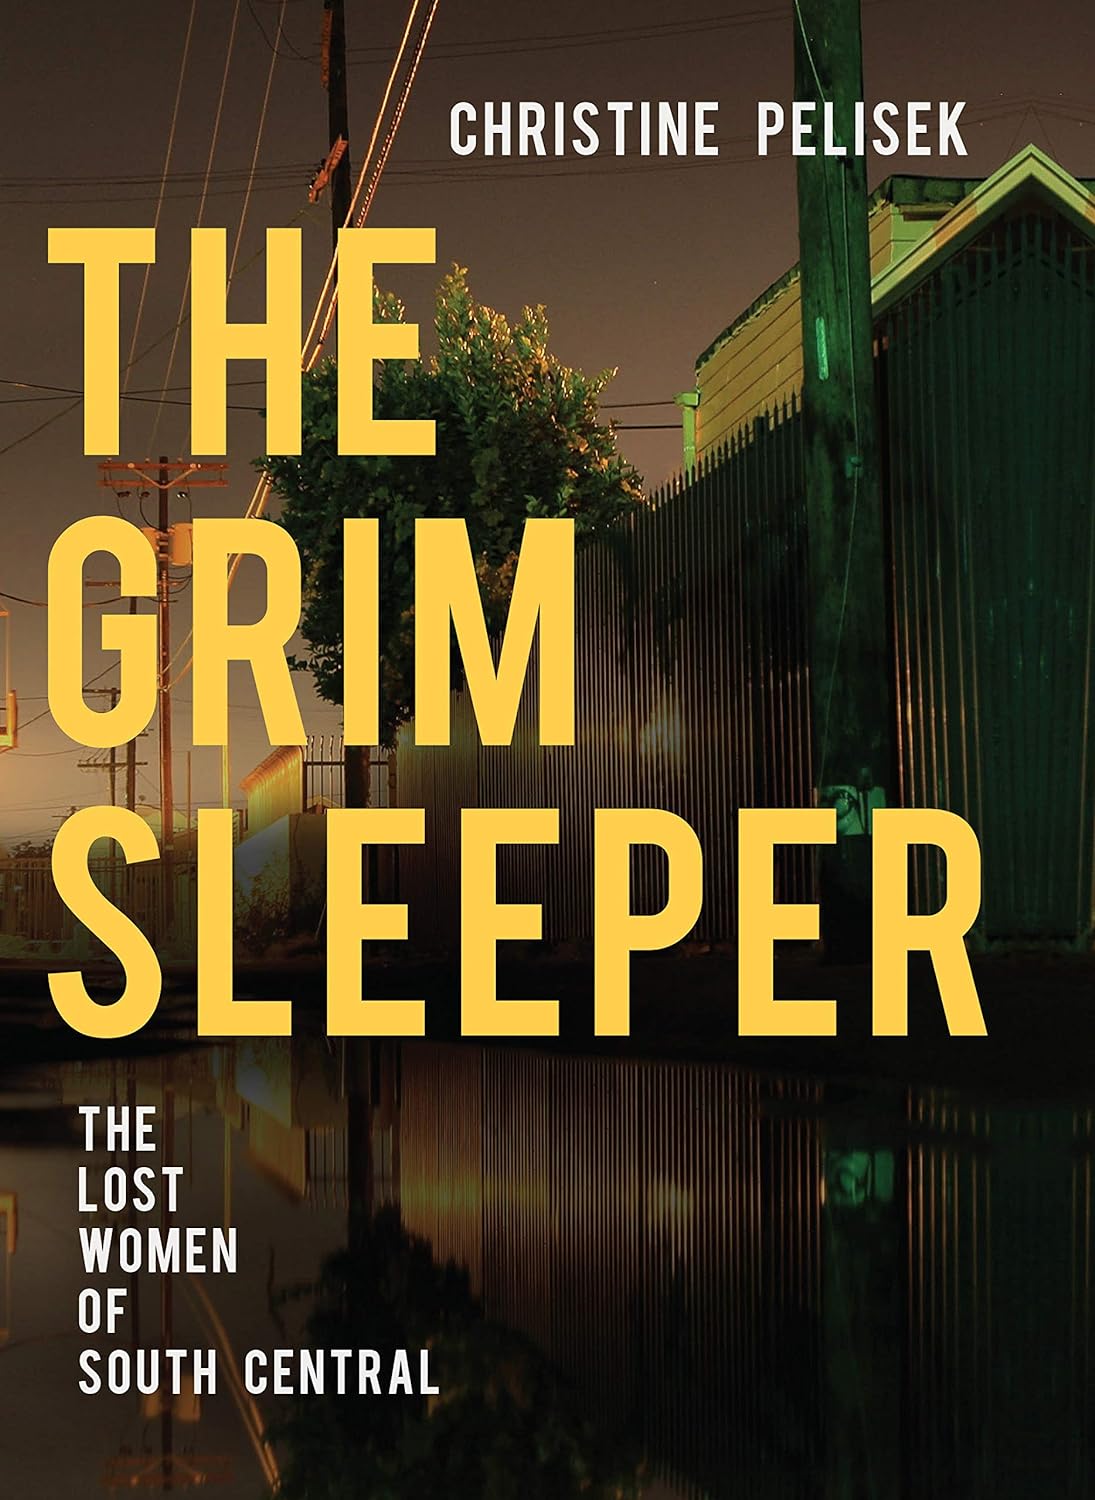 The Grim Sleeper: The Lost Women of South Central